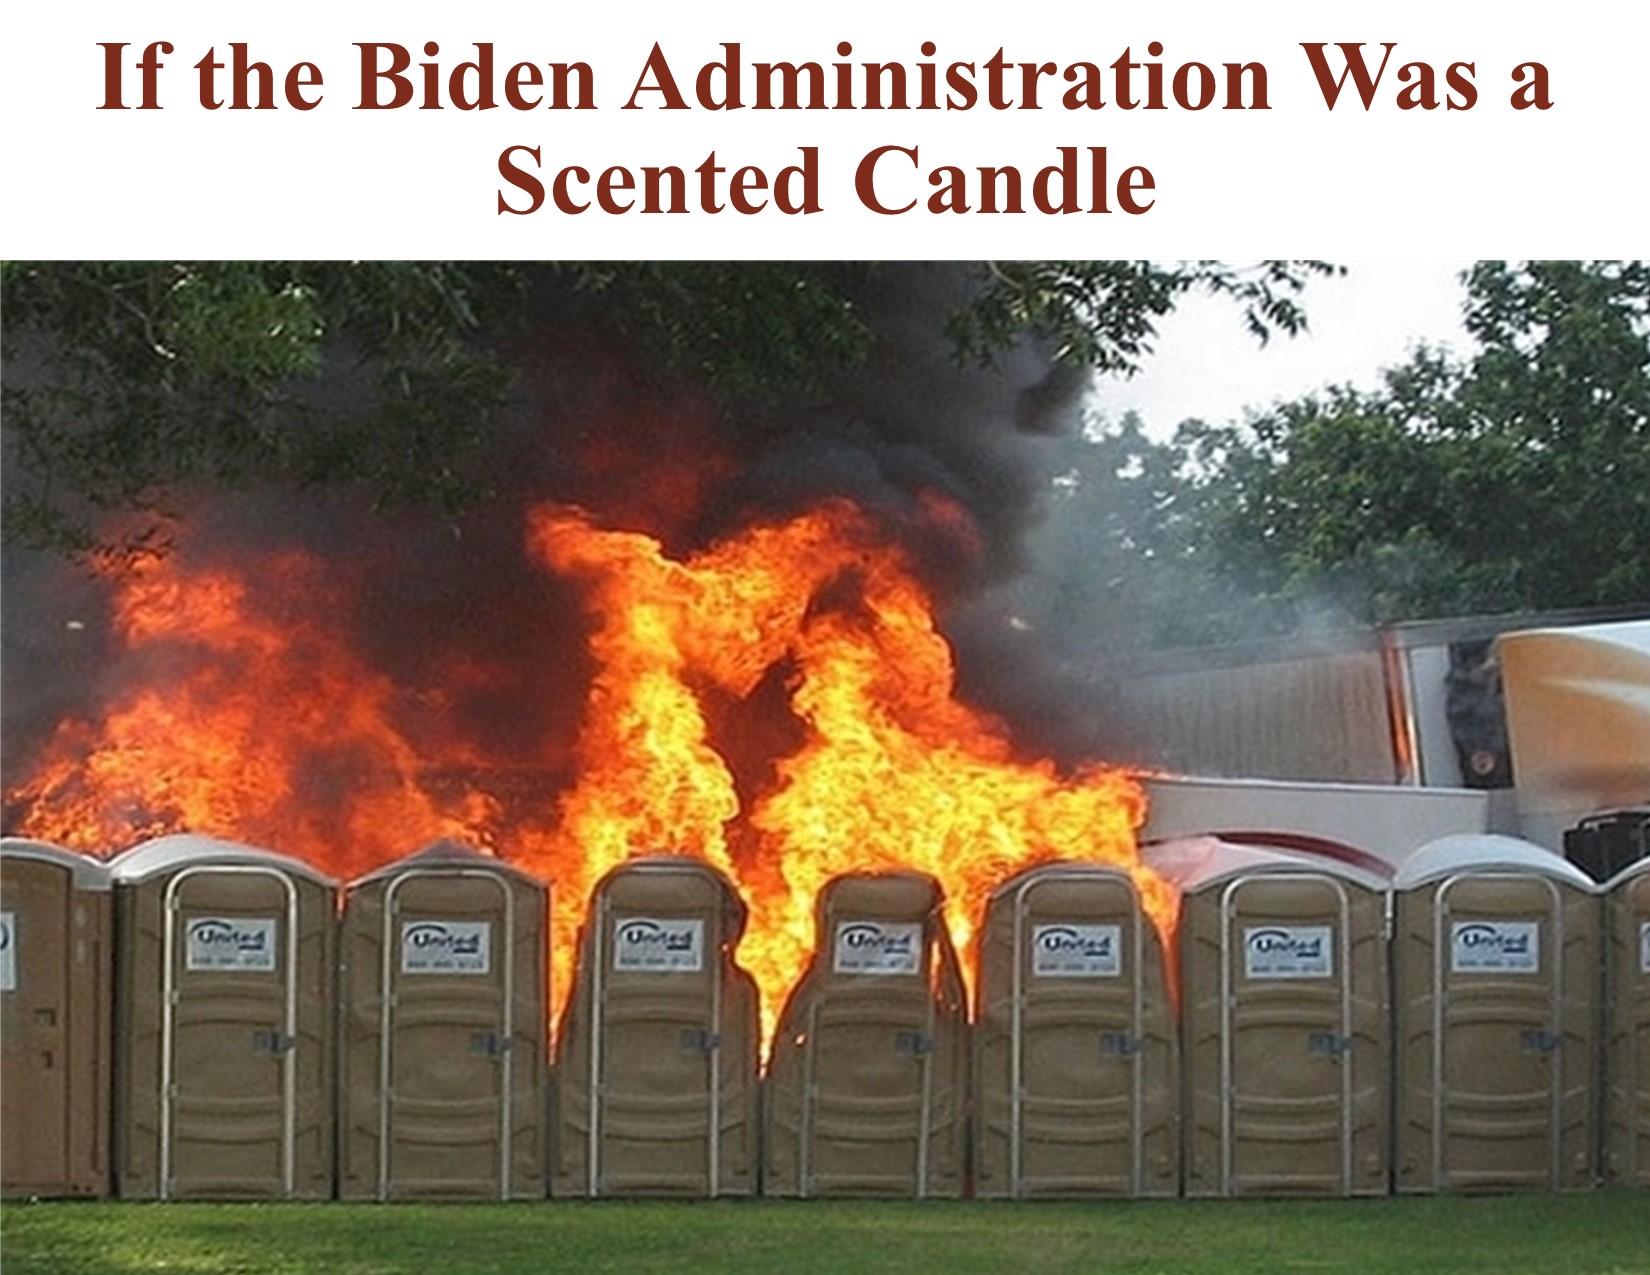 If Biden Was a Scented Candle.jpg